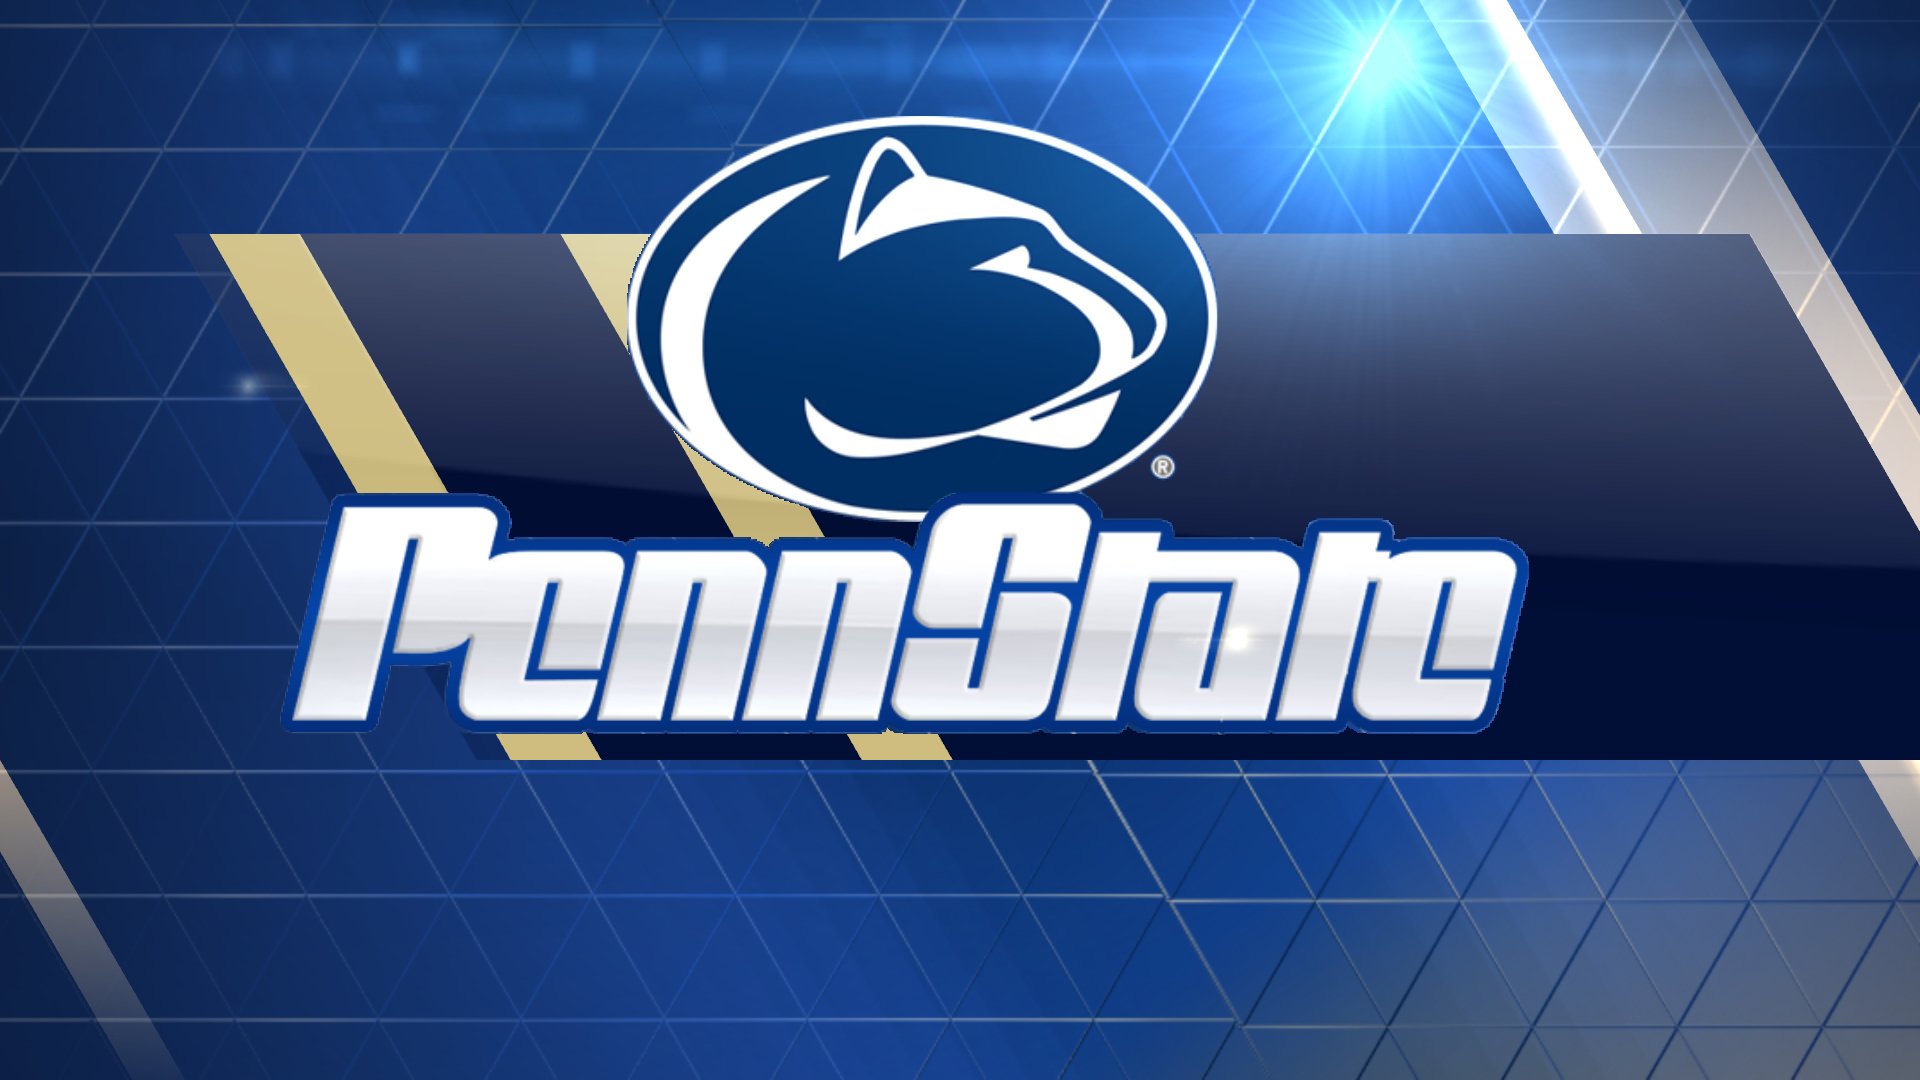 Penn State Nittany Lions College Football Wallpaper Background